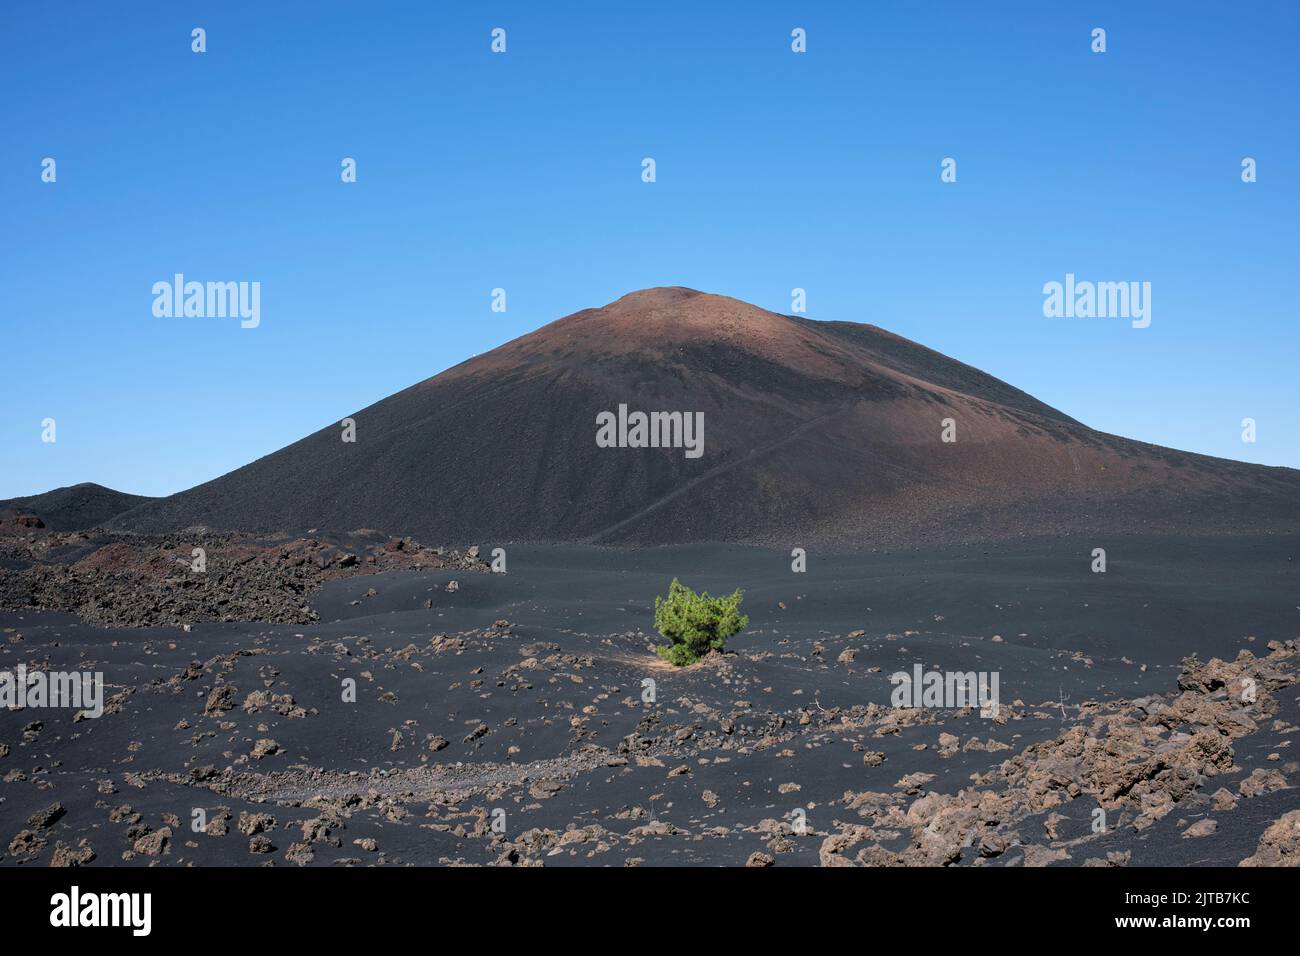 The black volcano of Chinyero and a lone Canarian pine tree growing in the volcanic soil, Tenerife, Canary Islands, Spain Stock Photo